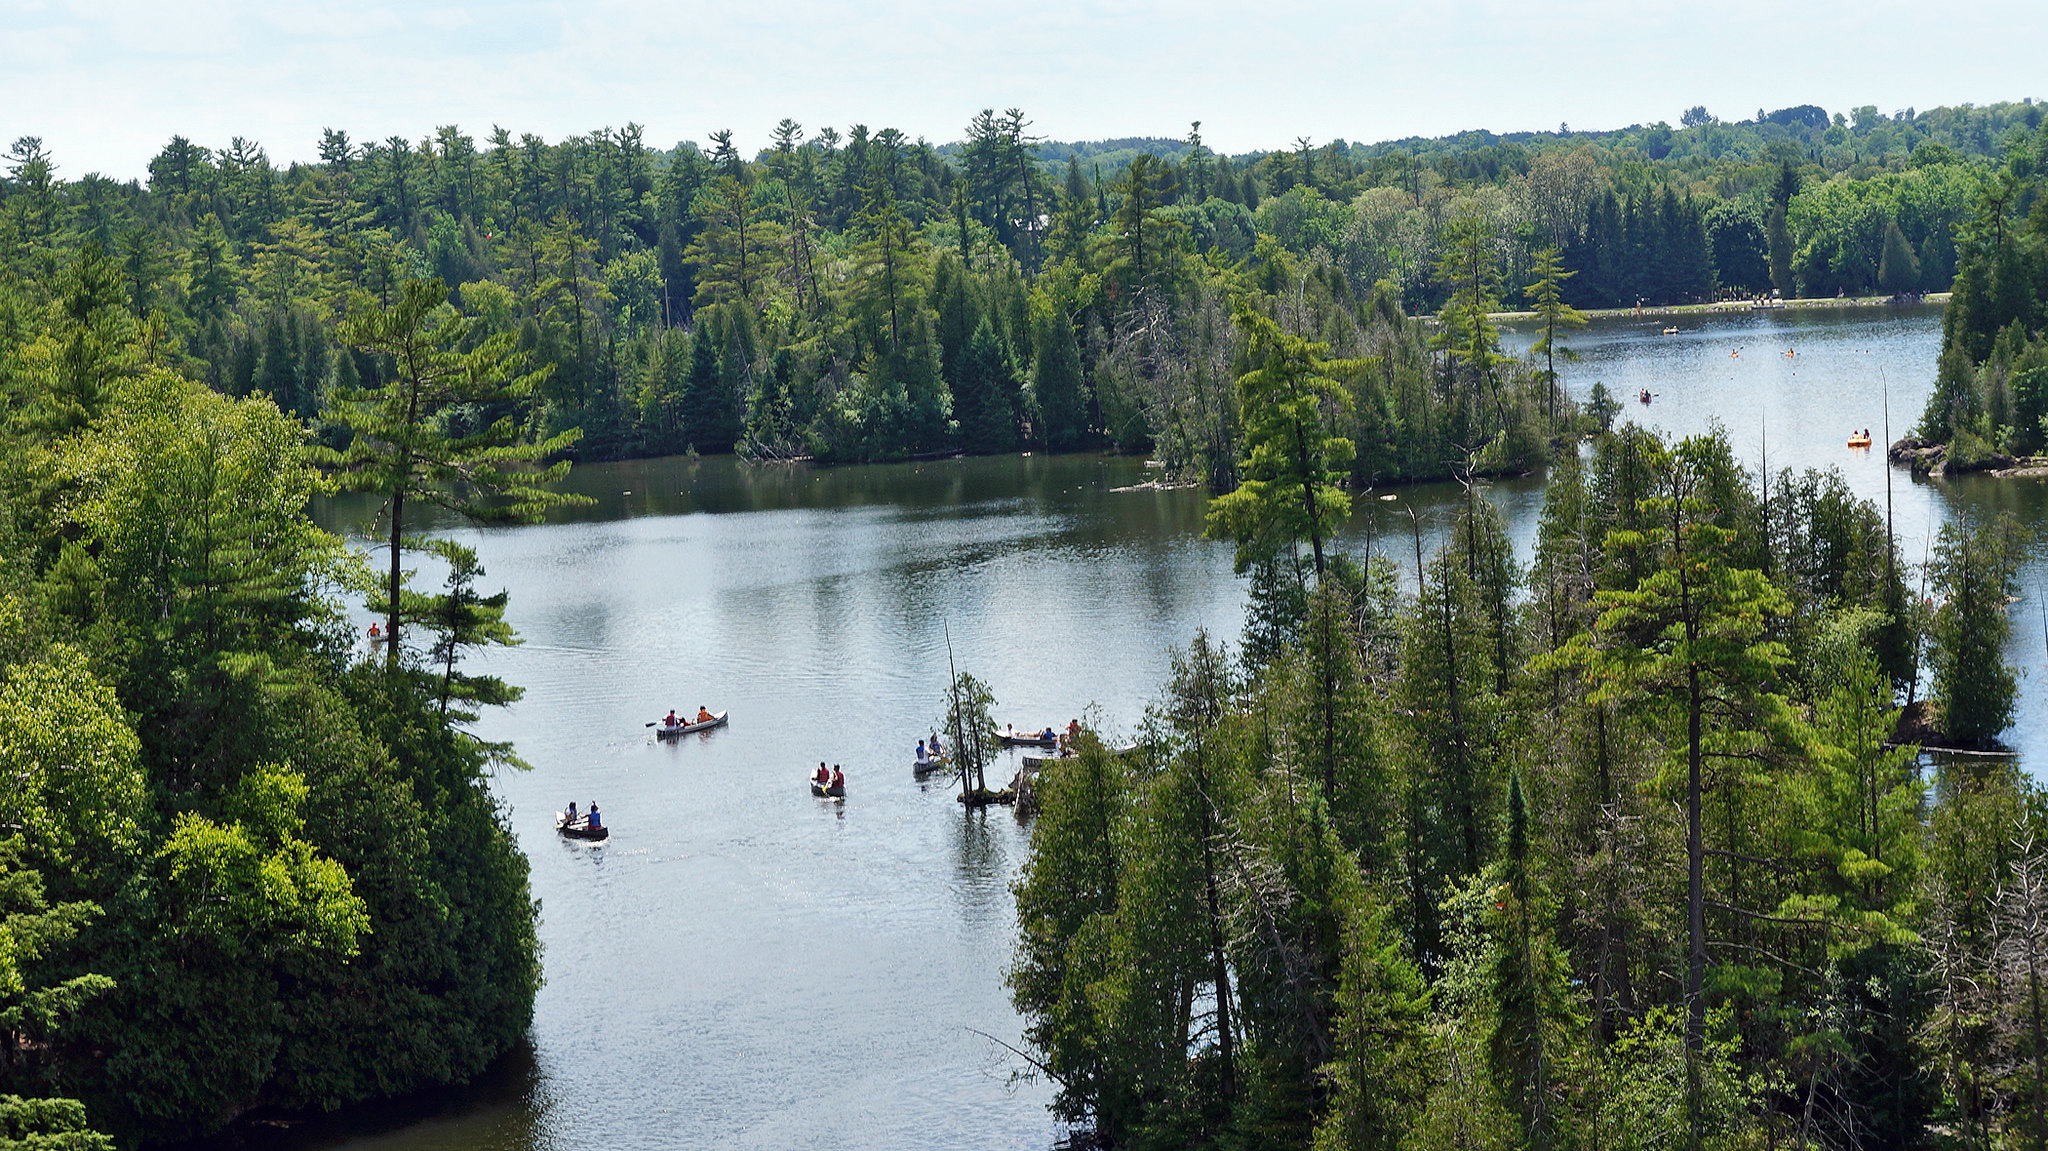 Aerial view of Rockwood on a summer day with several canoes and kayaks on the water.